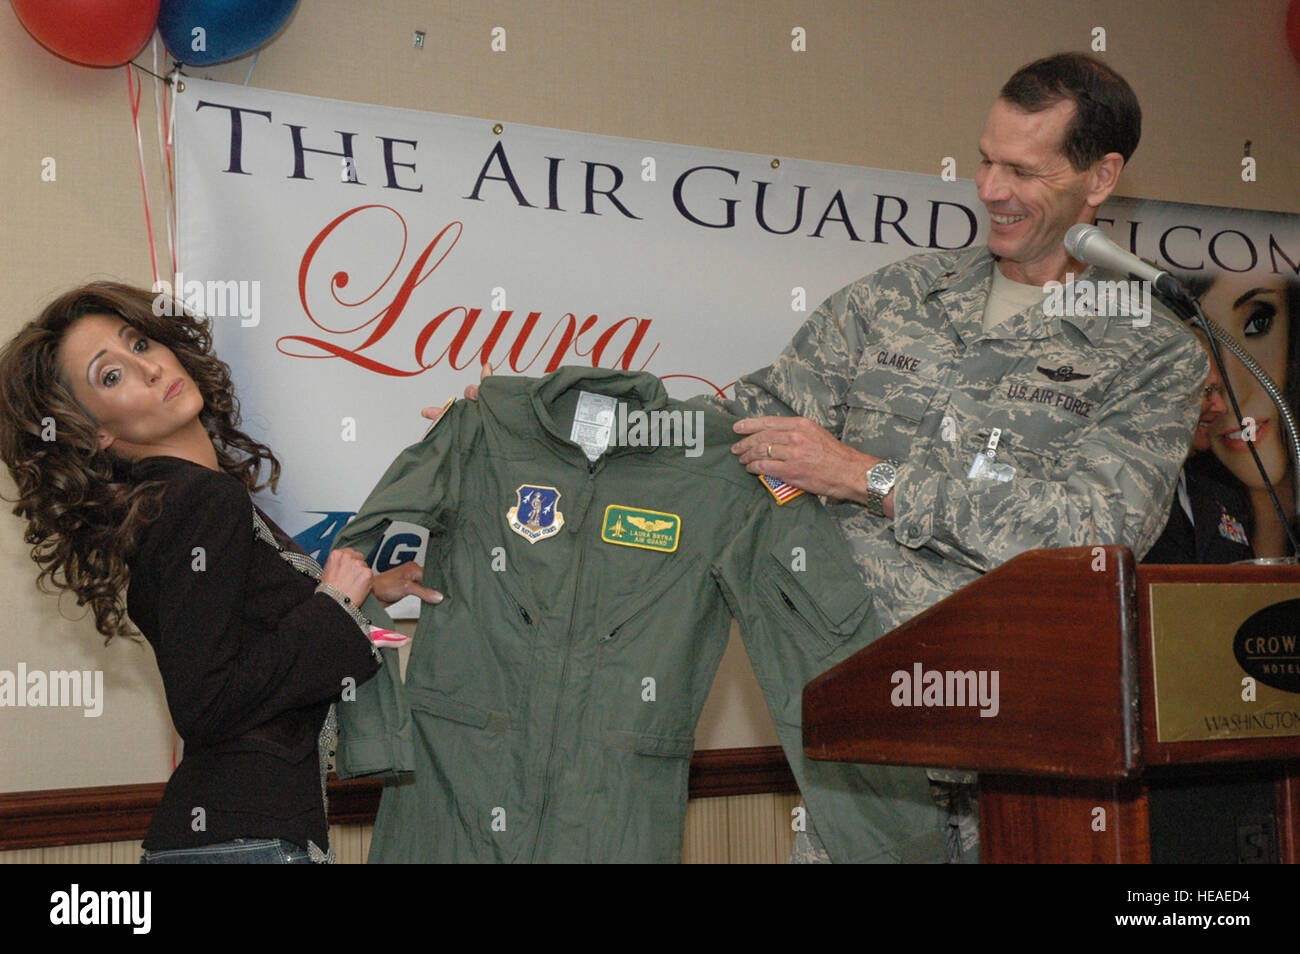 Brigadier General Stanley 'Sid' Clarke, the Deputy Director of the Air National Guard presents a flight suit to rising country music star Laura Bryna on May 30th, 2008 at an unveiling event of her song 'Hometown Heroes' at the Crowne Plaza Hotel in Arlington, Virginia.  Laura Bryna is the new voice of the Air Guard advertising campaign. Stock Photo